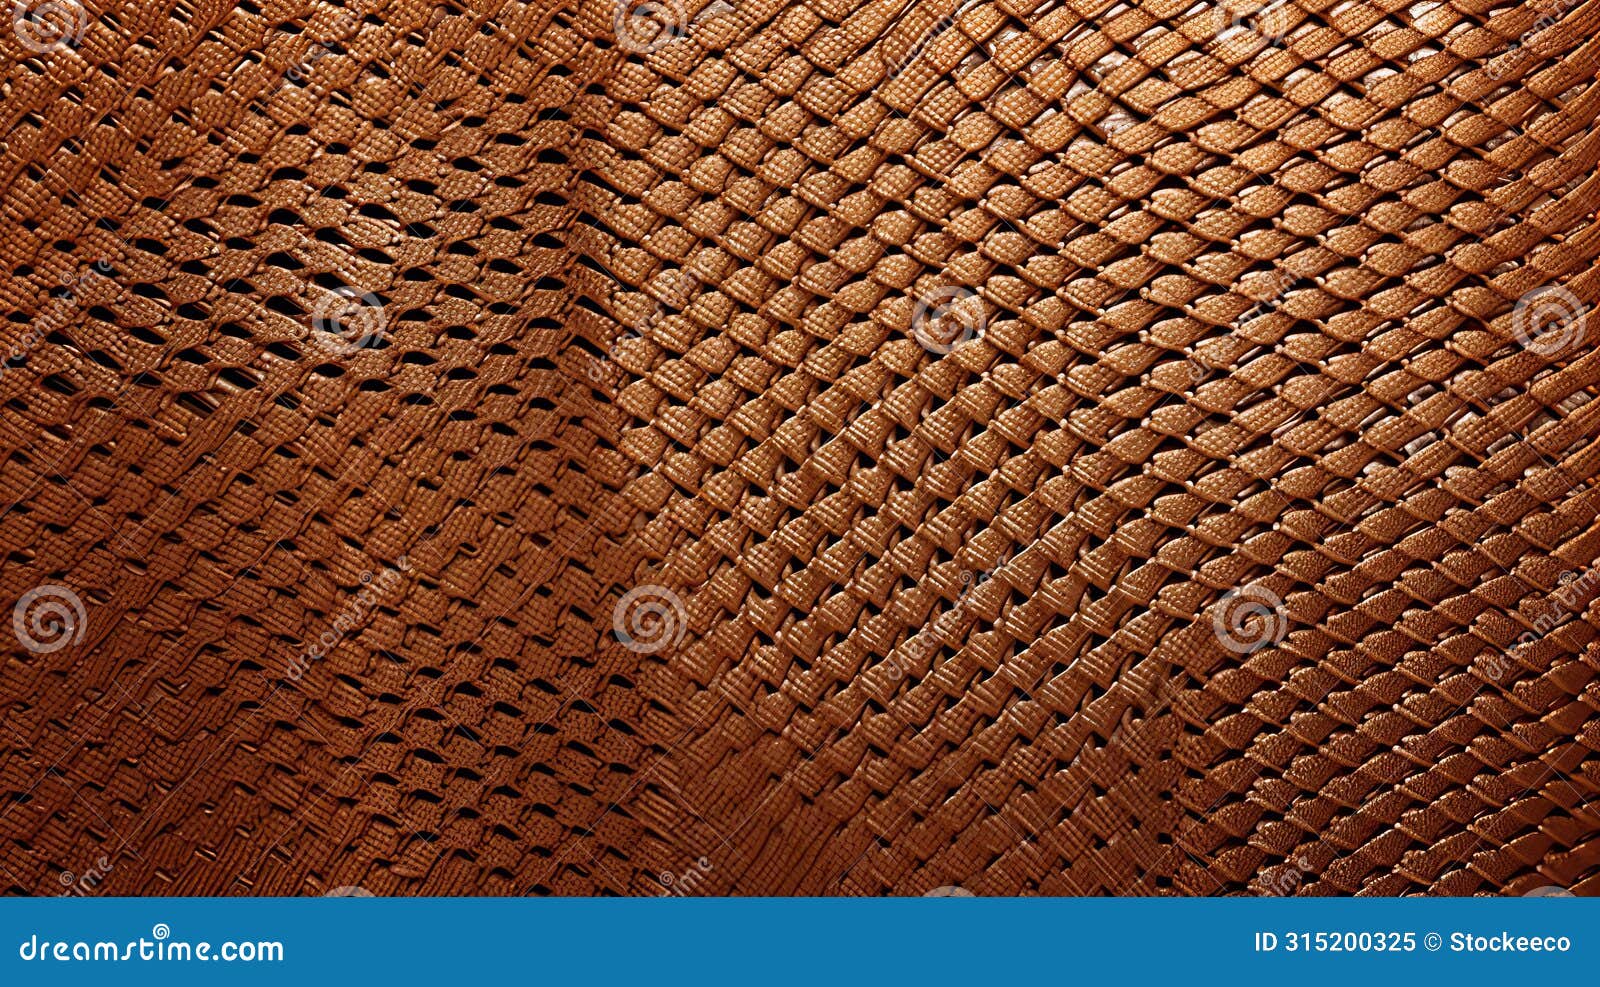 lacquered detailed woven fabric texture background mesh pattern